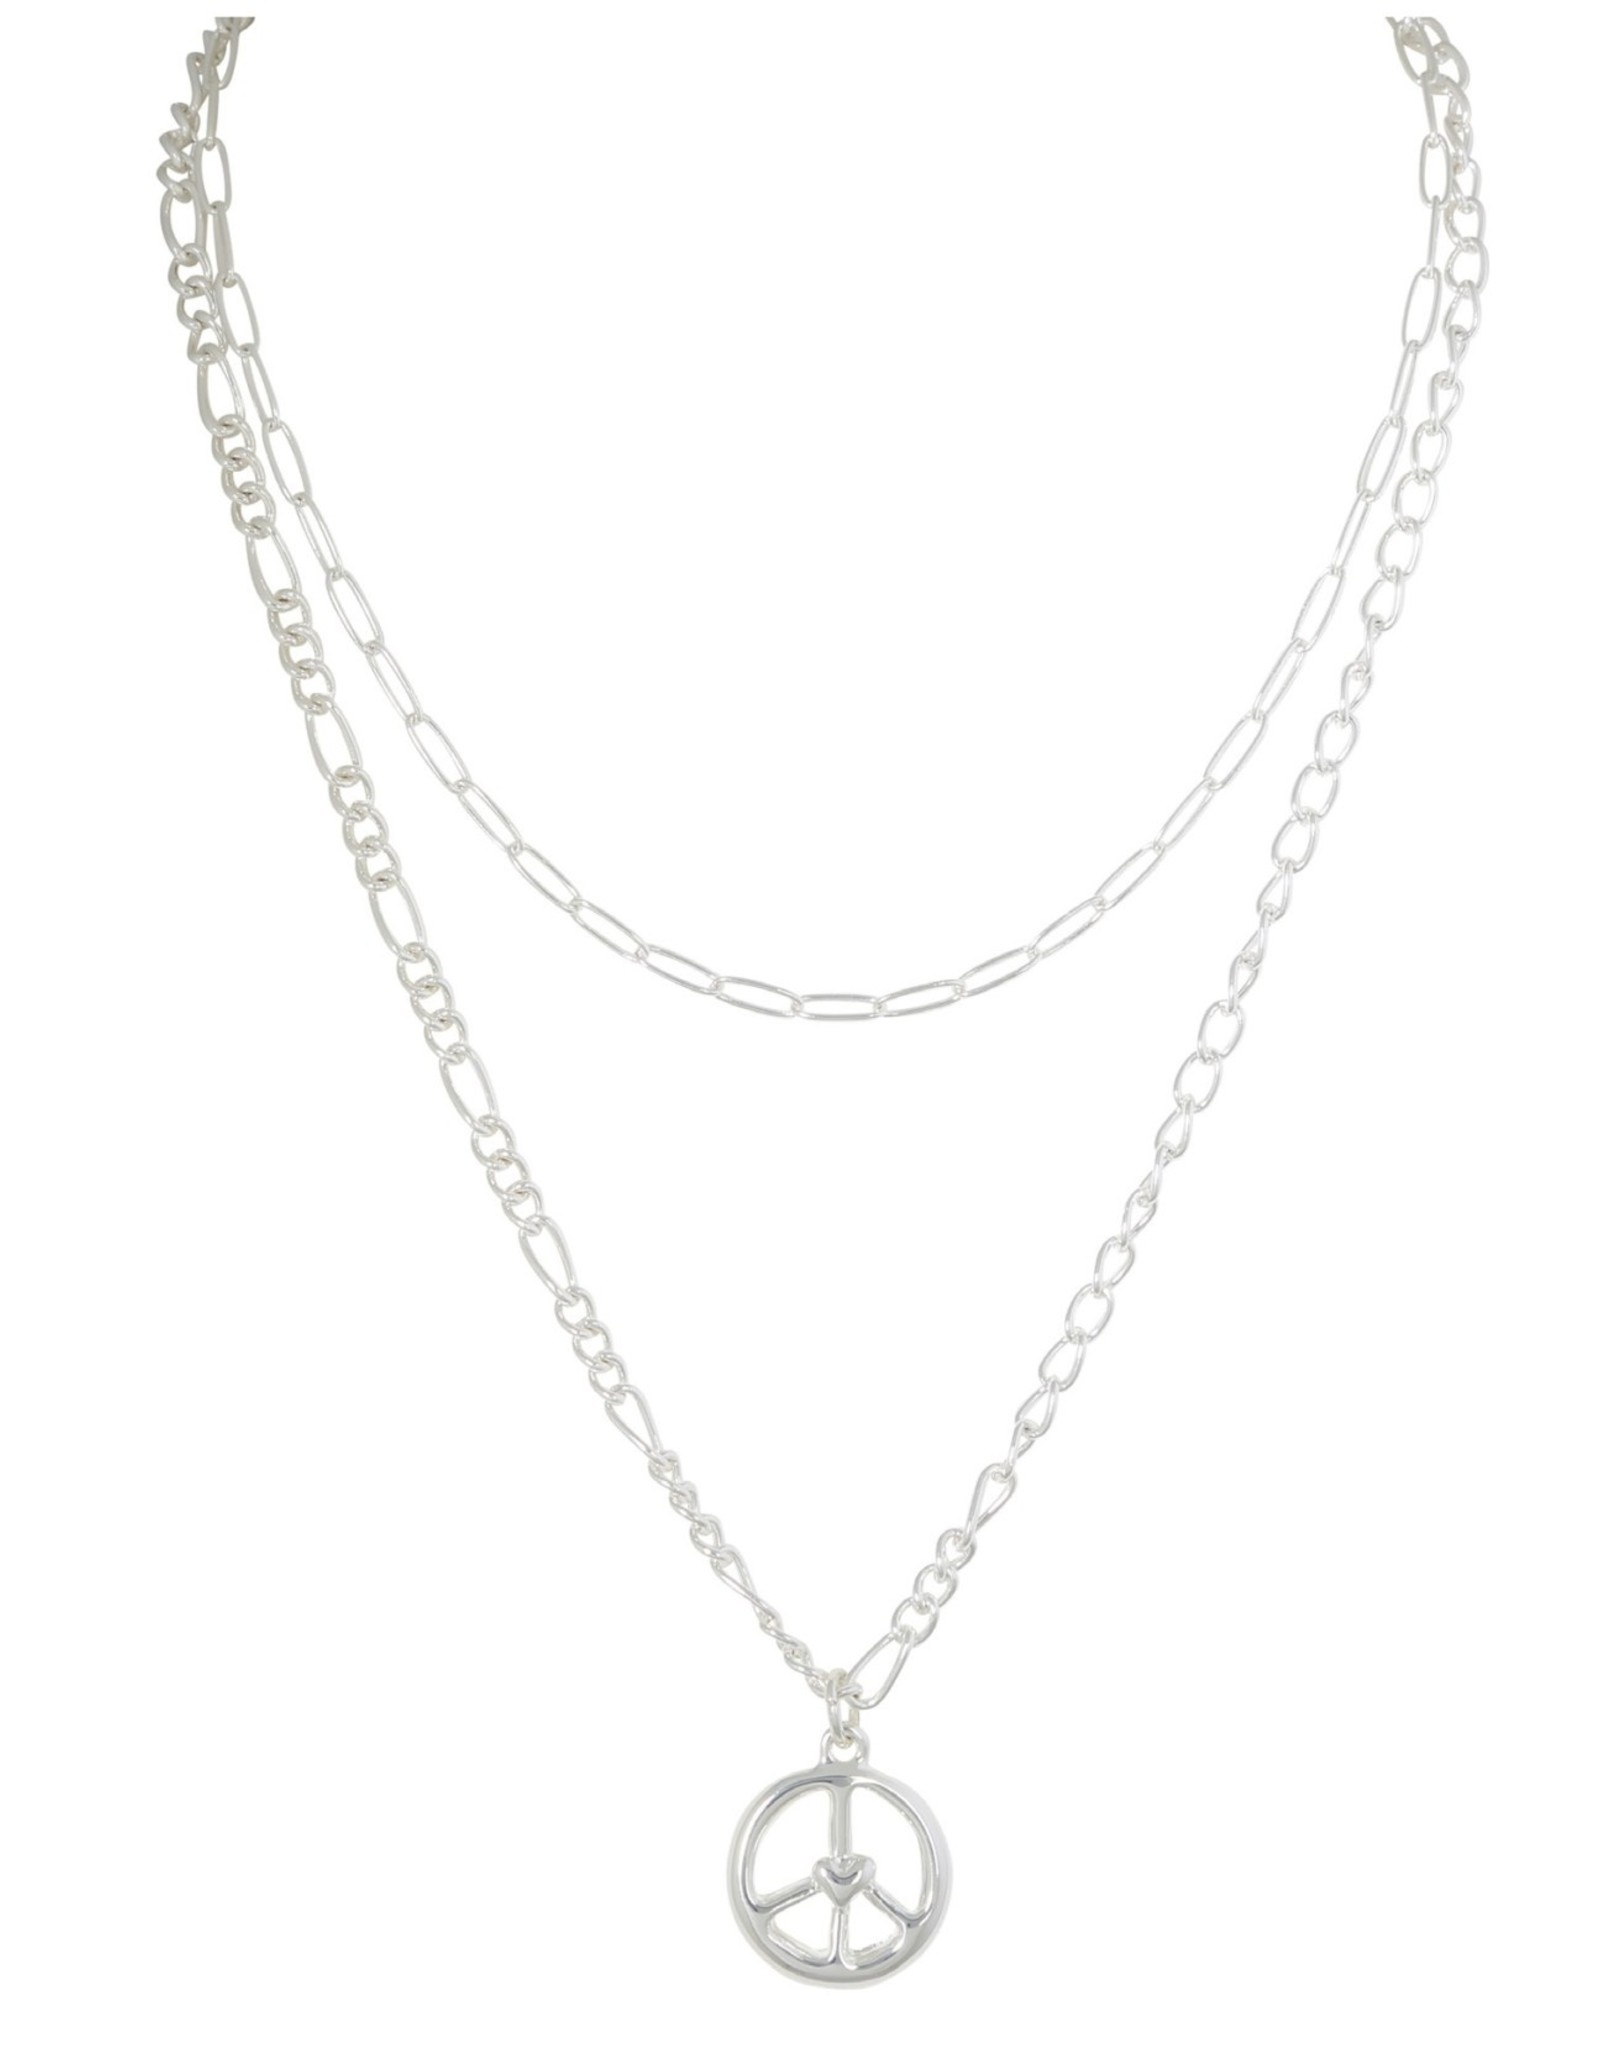 Merx Inc. 2 Layer Peace Necklace Silver